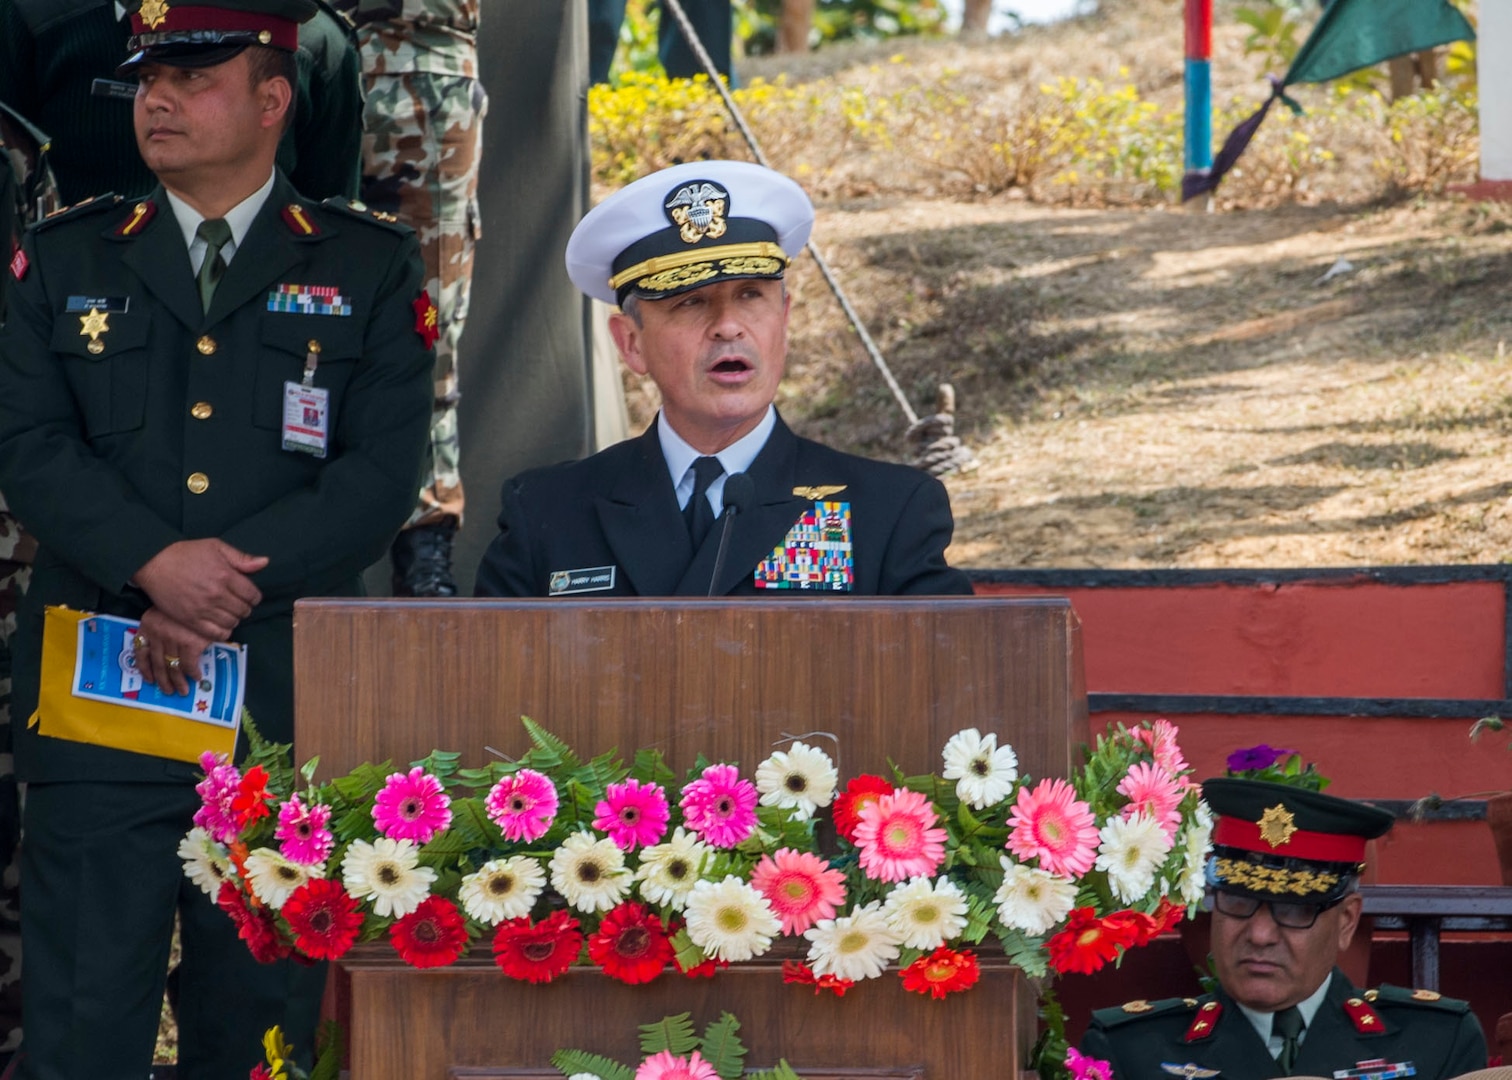 U.S. Pacific Command commander Admiral Harry Harris gives opening remarks at the Birendra Peace Operations Training Centre (BPOTC) in Nepal during the opening ceremony of exercise Shanti Prayas III. Shanti Prayas III is a multinational United Nations peacekeeping exercise designed to provide pre-deployment training to U.N. partner countries in preparation for real-world peacekeeping operations. (U.S. Navy Photo by Petty Officer 2nd Class Taylor Mohr)